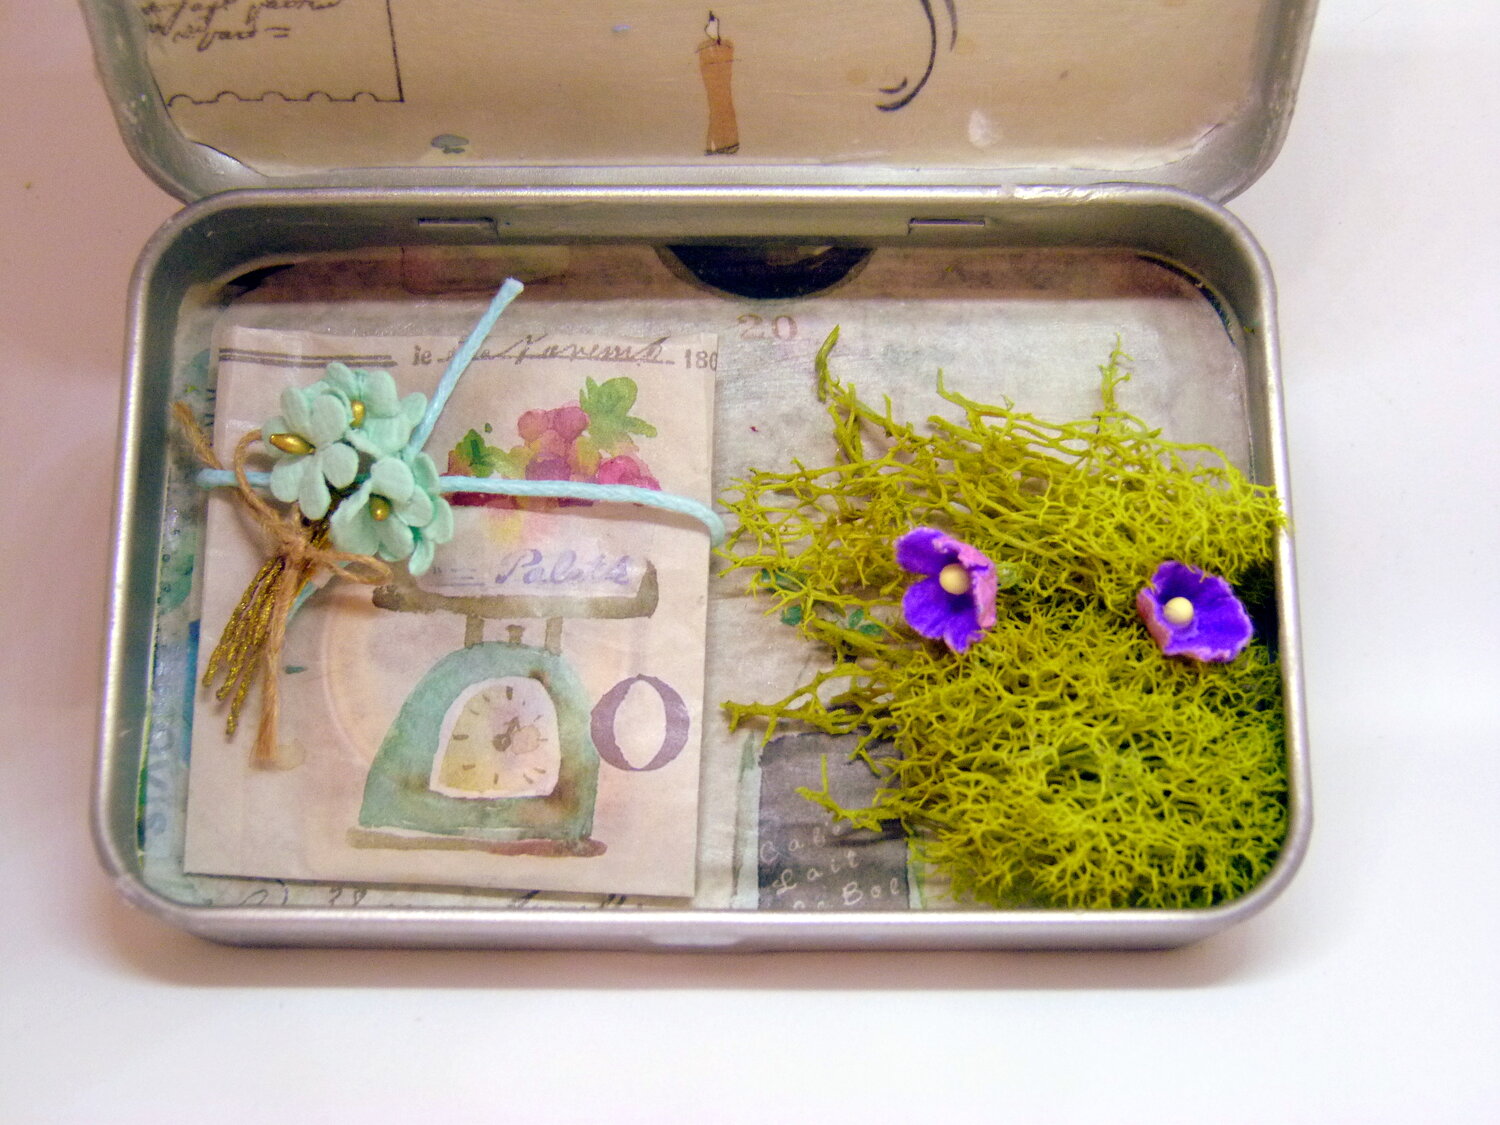 Mini bookshelf in an altoid tin, Gallery posted by Patricia